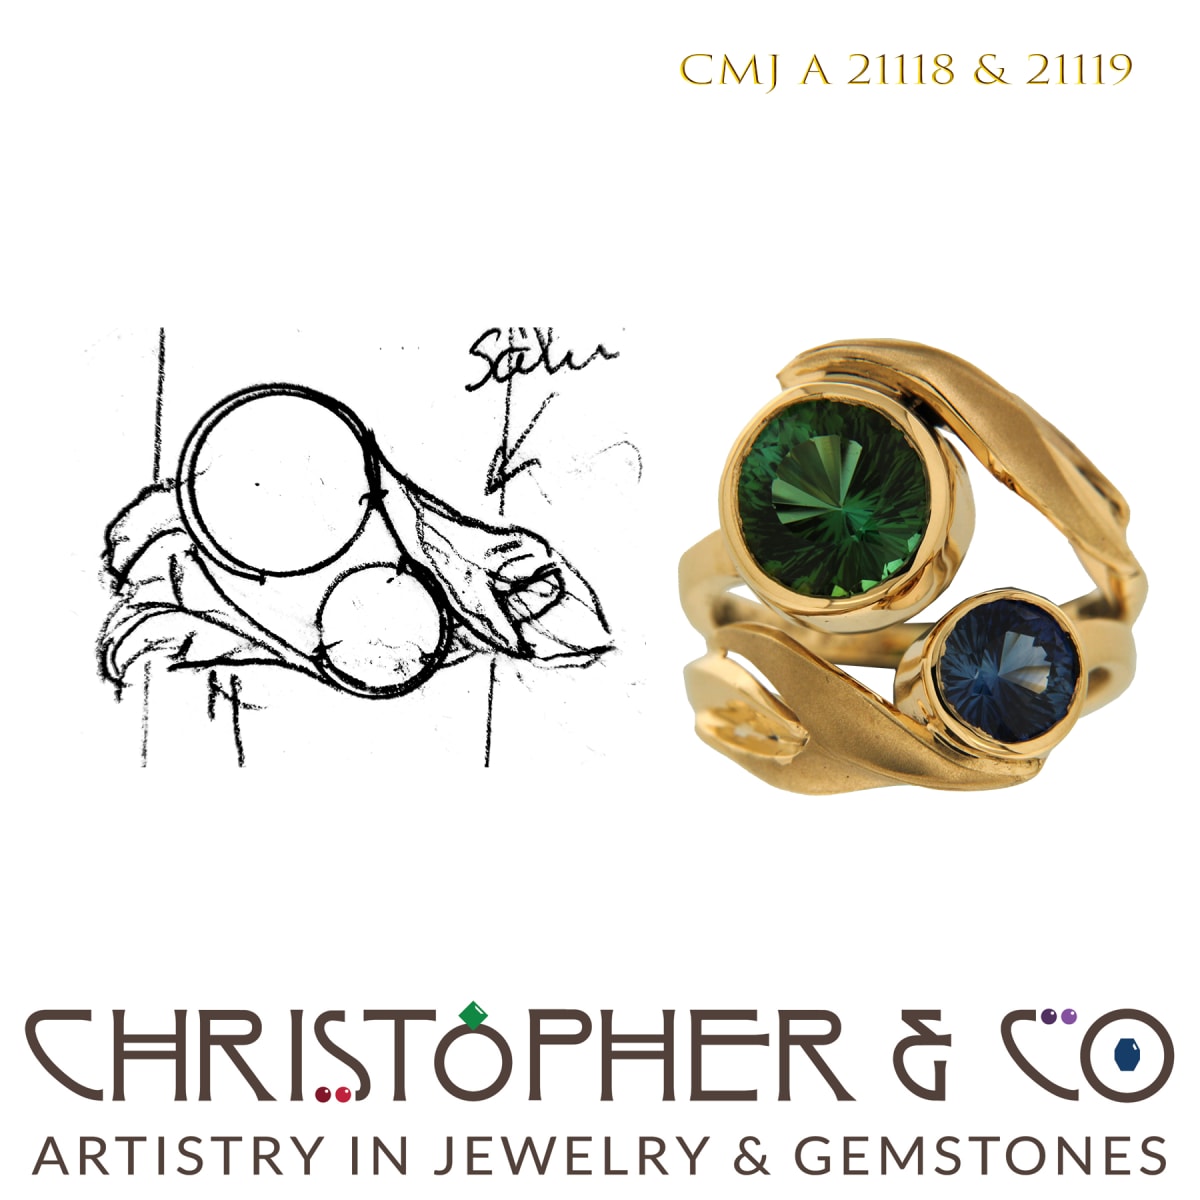 CMJ A 21118 & 21119  Two Gold rings designed by Christopher M. Jupp set with Tourmaline and Sapphire.  Both gems were concave cut by Richard Homer.  Image: CMJ A 21118 & 21119  Two Gold rings designed by Christopher M. Jupp set with Tourmaline and Sapphire.  Both gems were concave cut by Richard Homer.